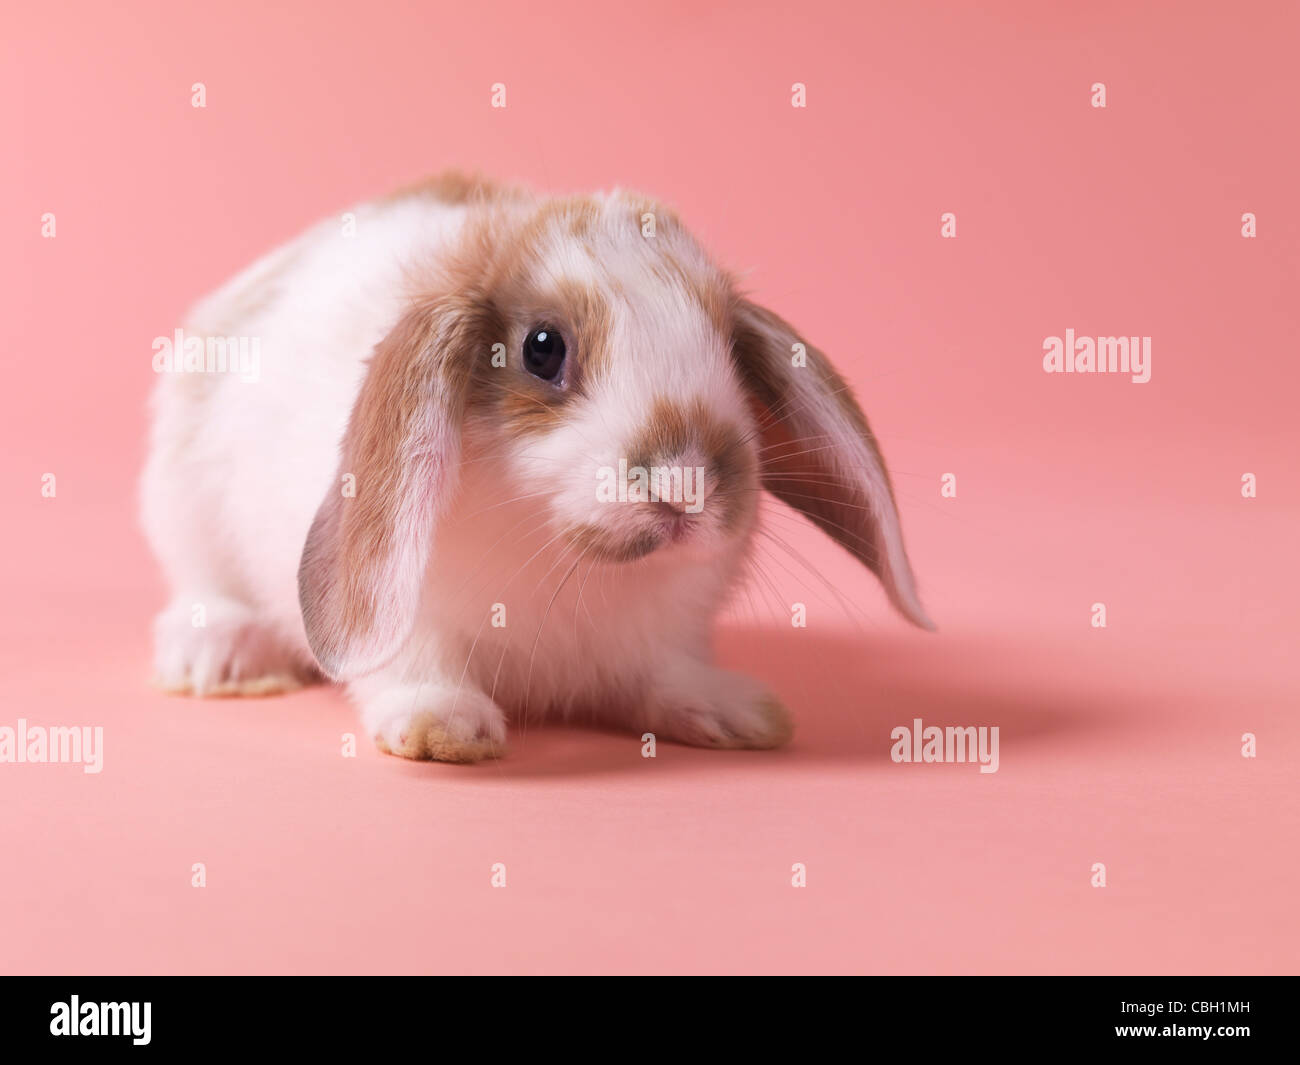 Cute little pet bunny rabbit isolated on pink background Stock Photo